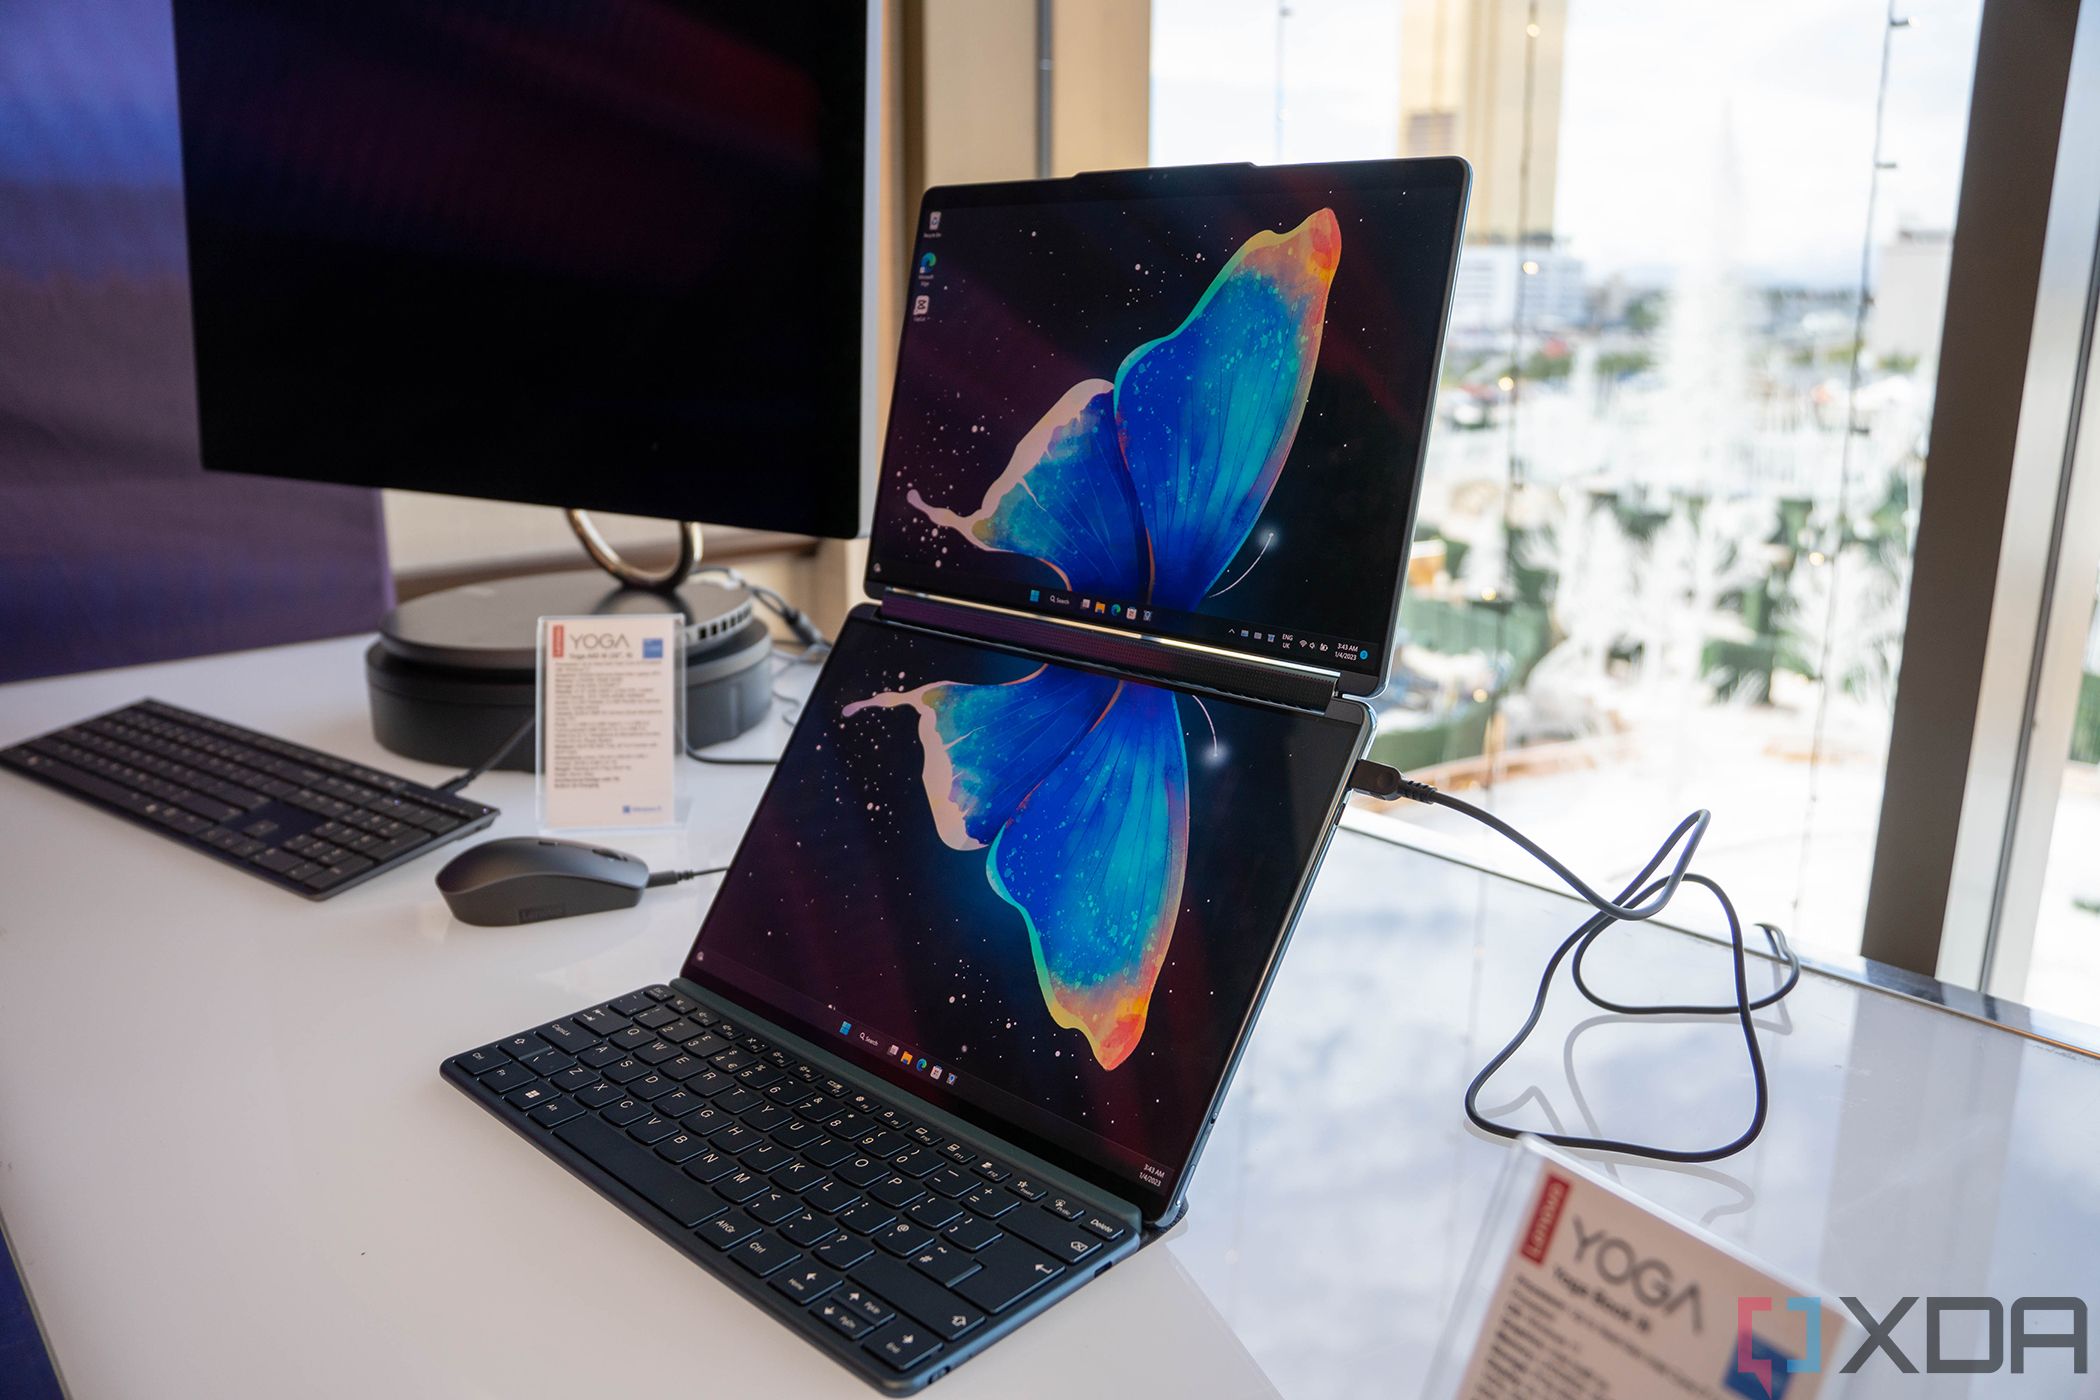 The Yoga Book 9i is the CES 2023 laptop I most want to love